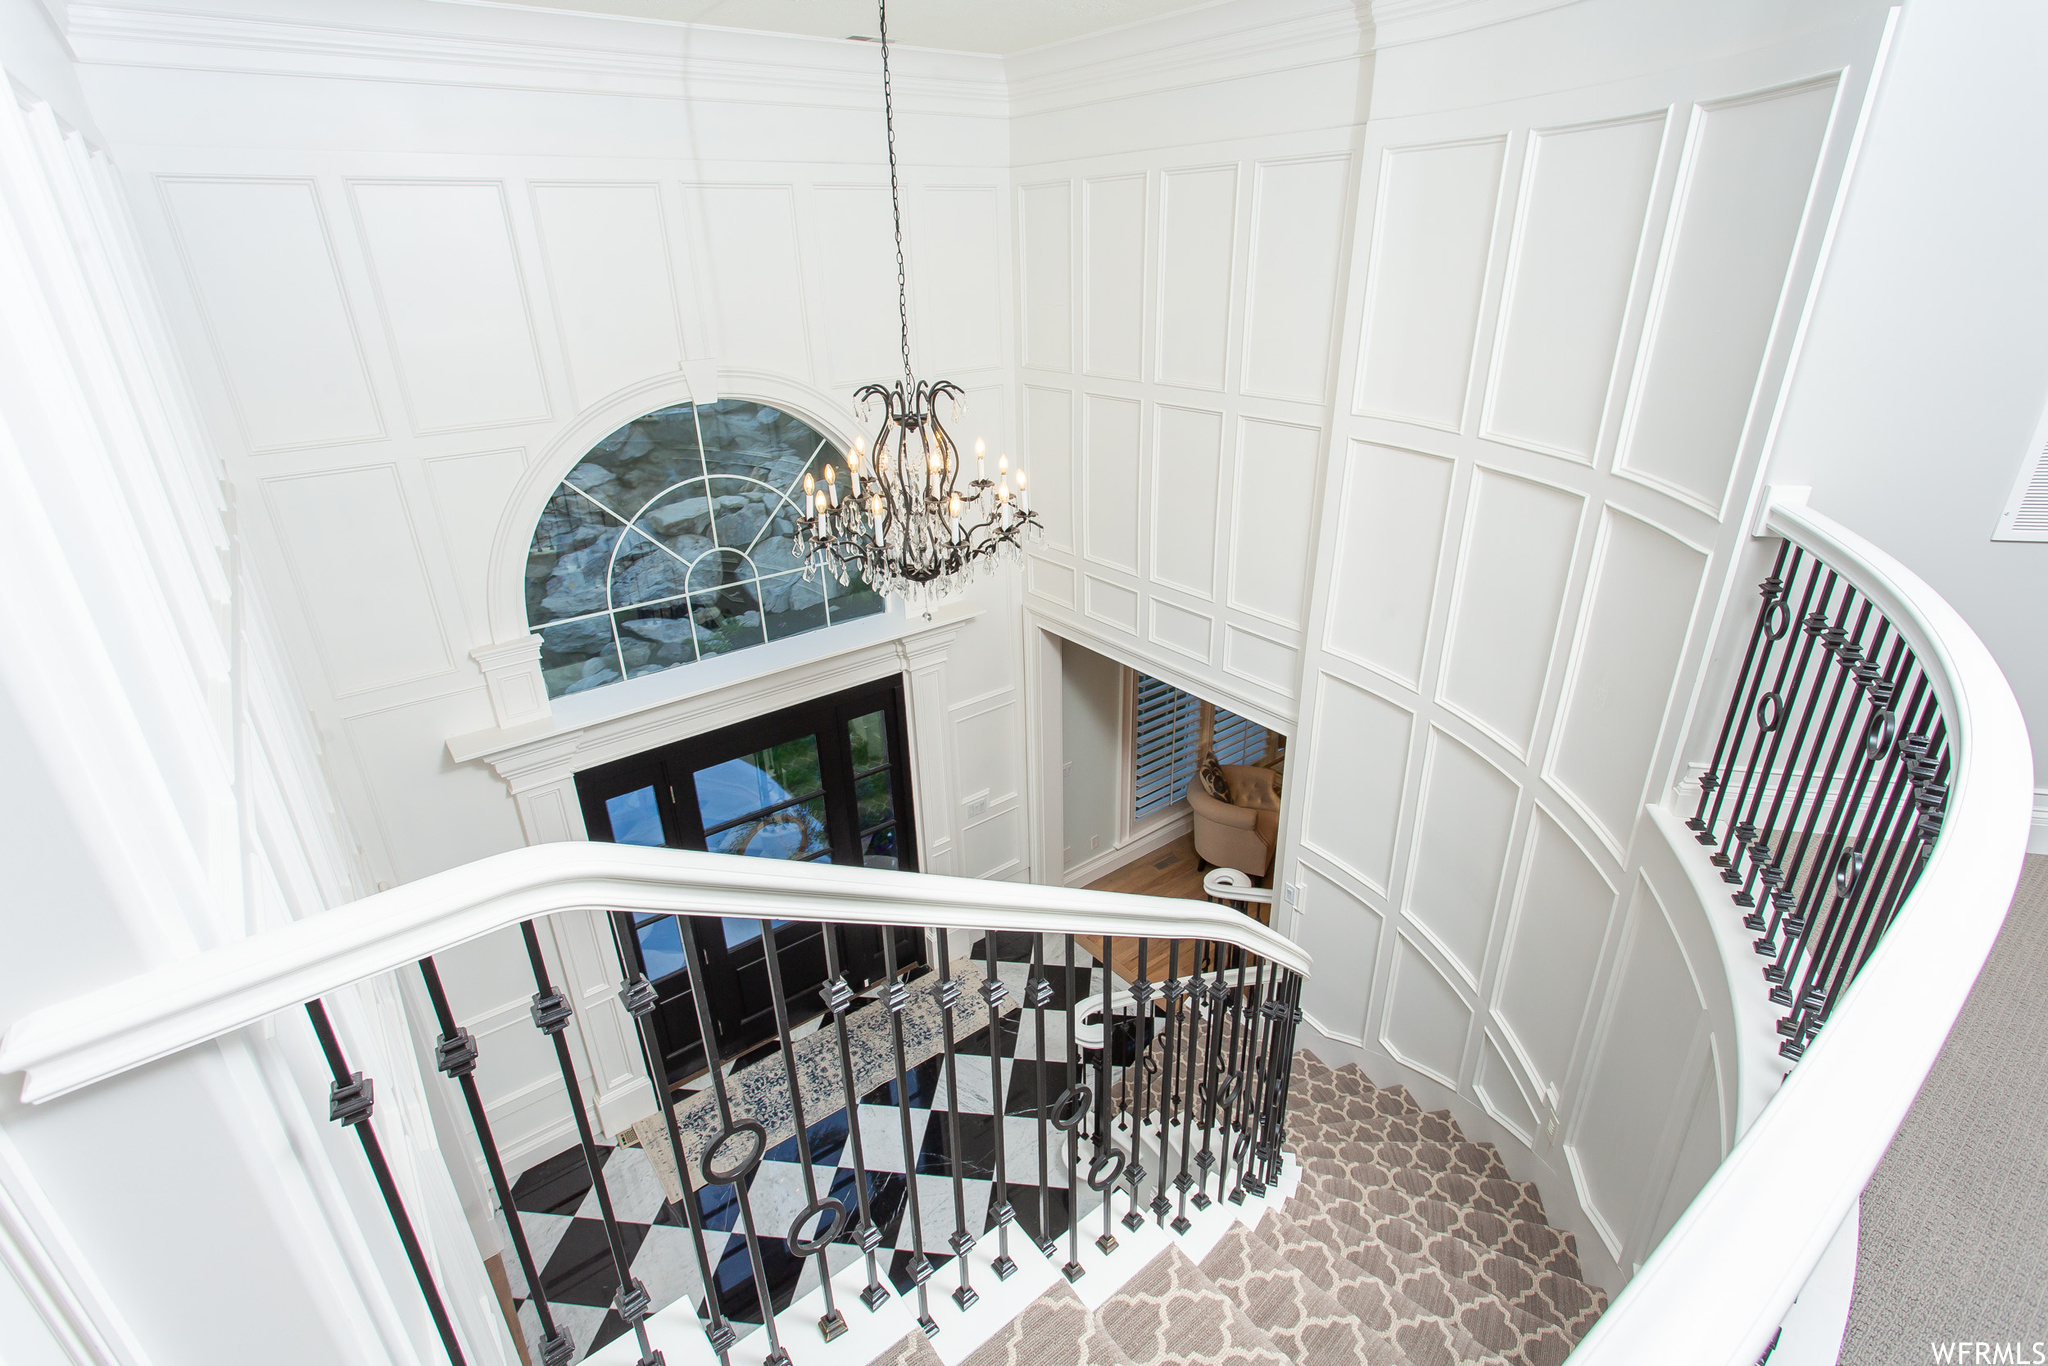 Stairway featuring a high ceiling and ornamental molding.